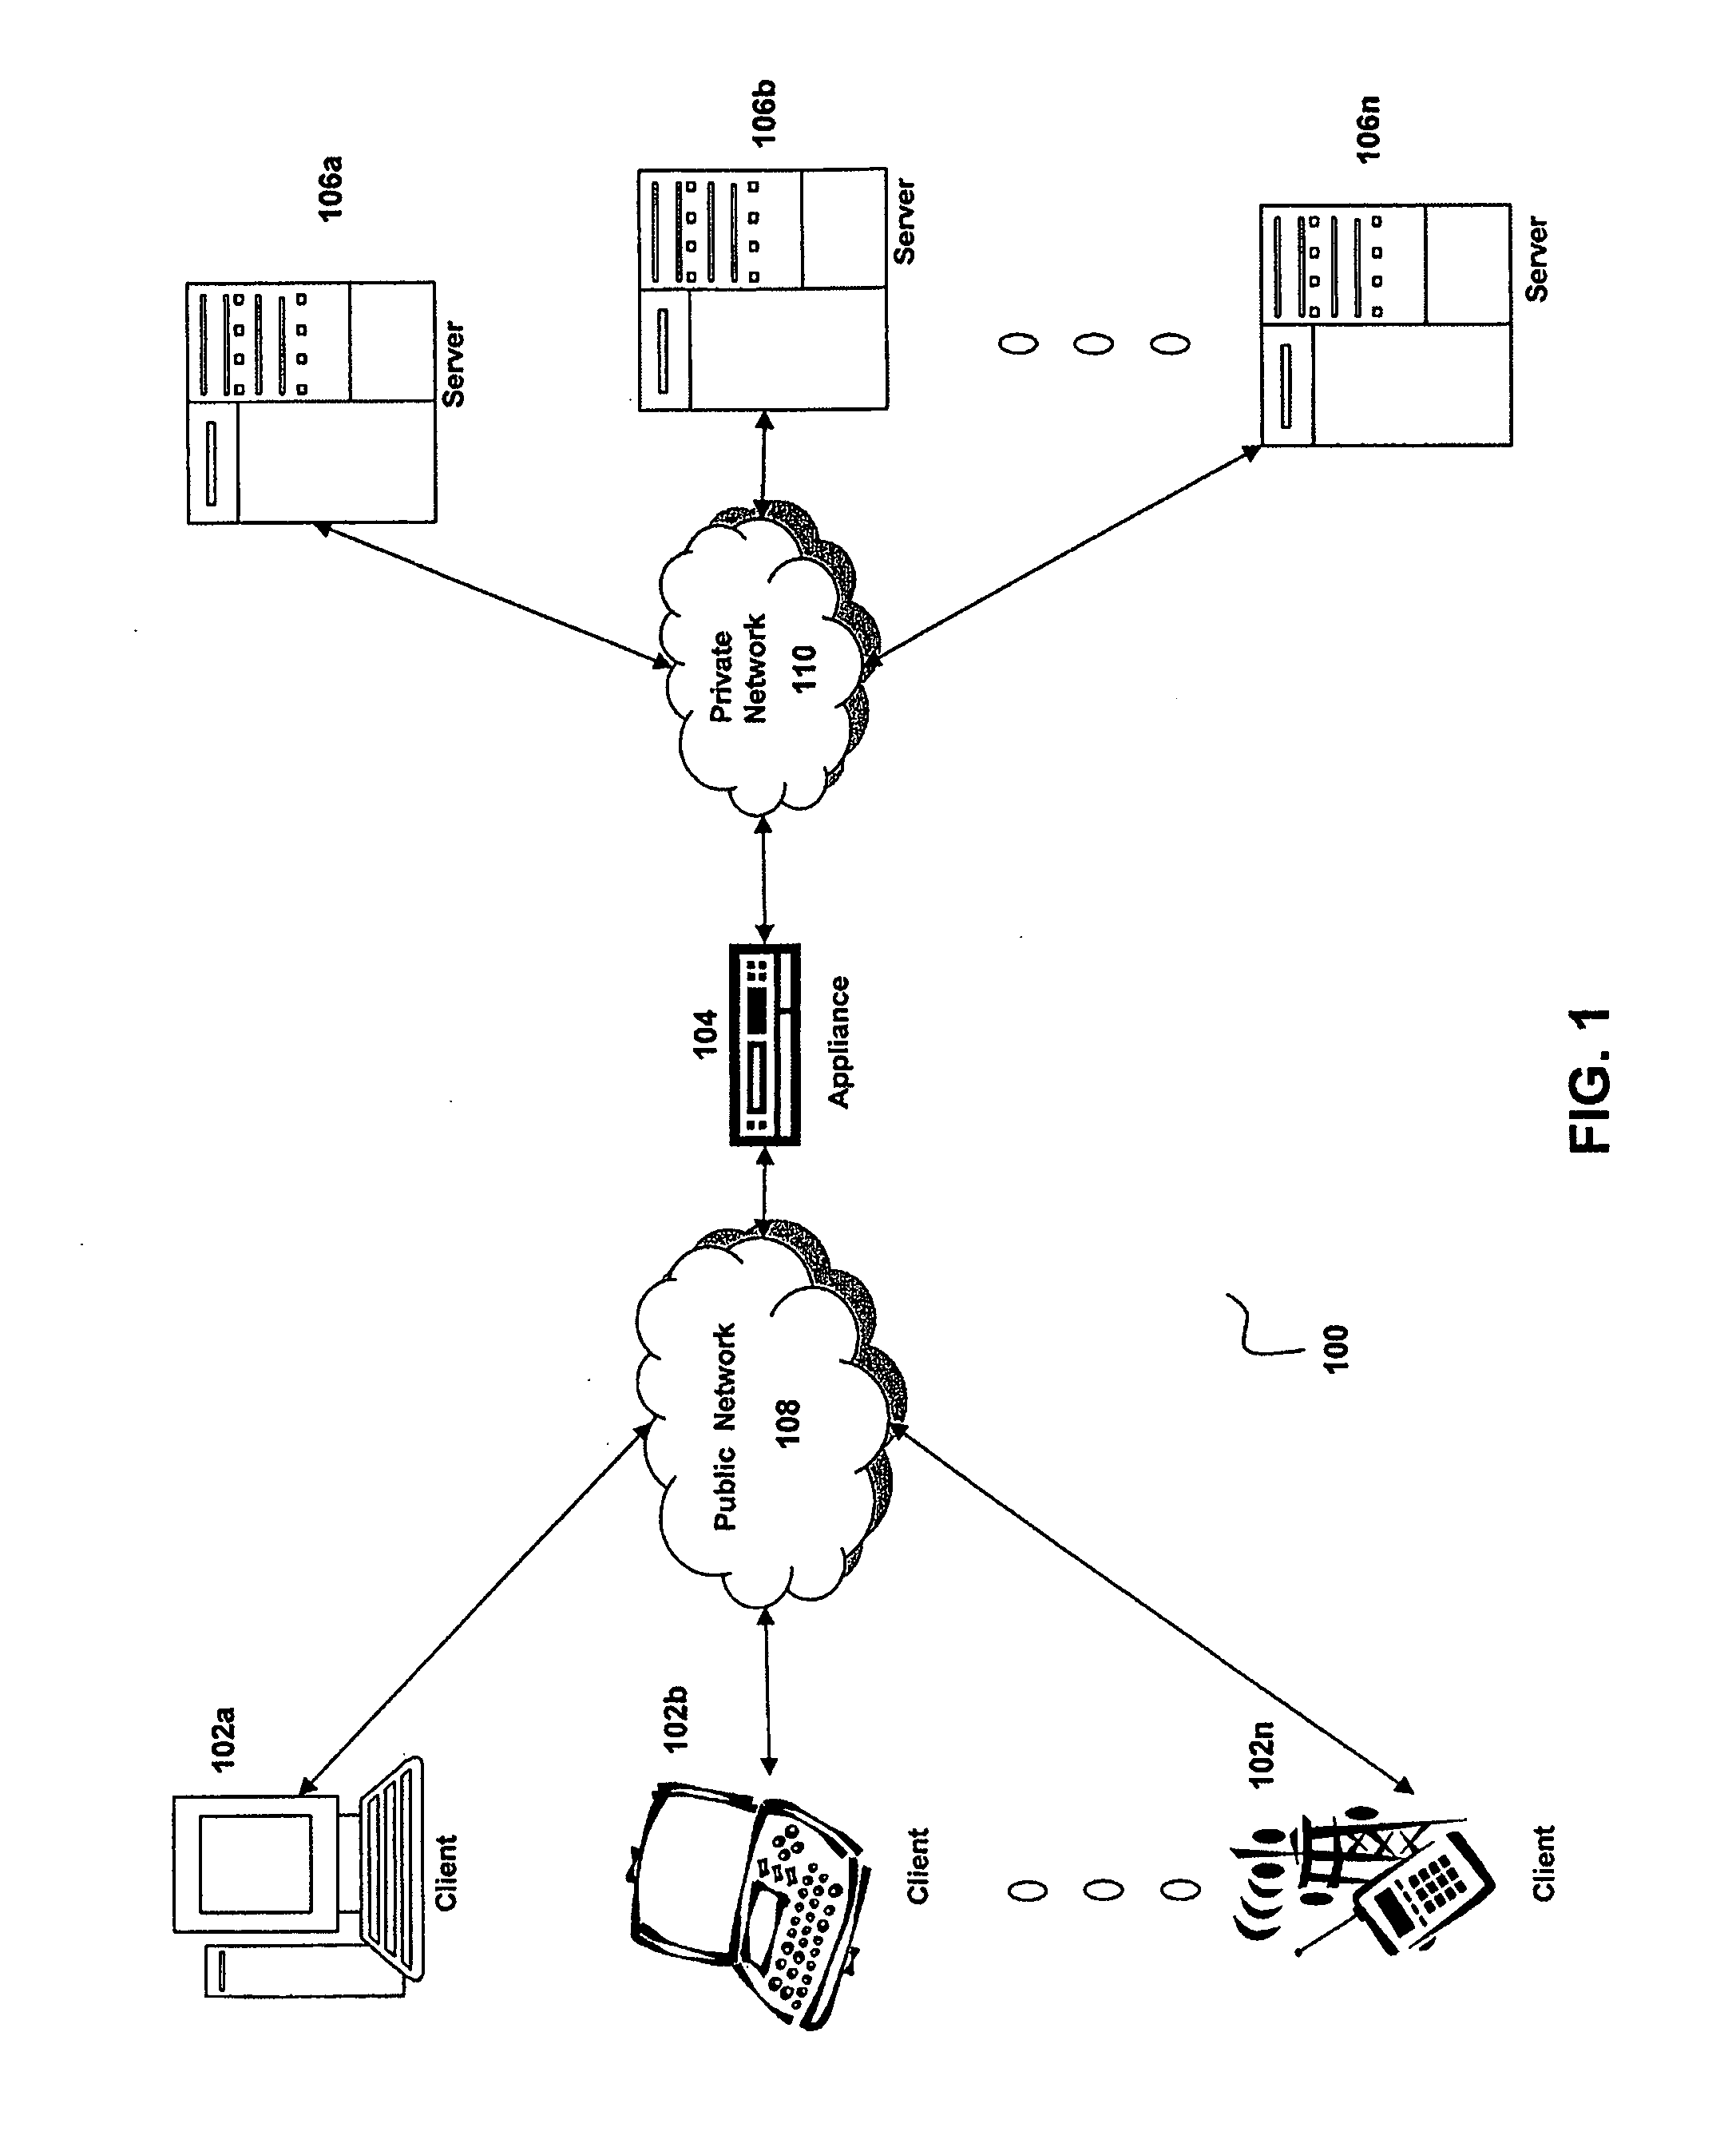 System and method for performing entity tag and cache control of a dynamically generated object not identified as cacheable in a network